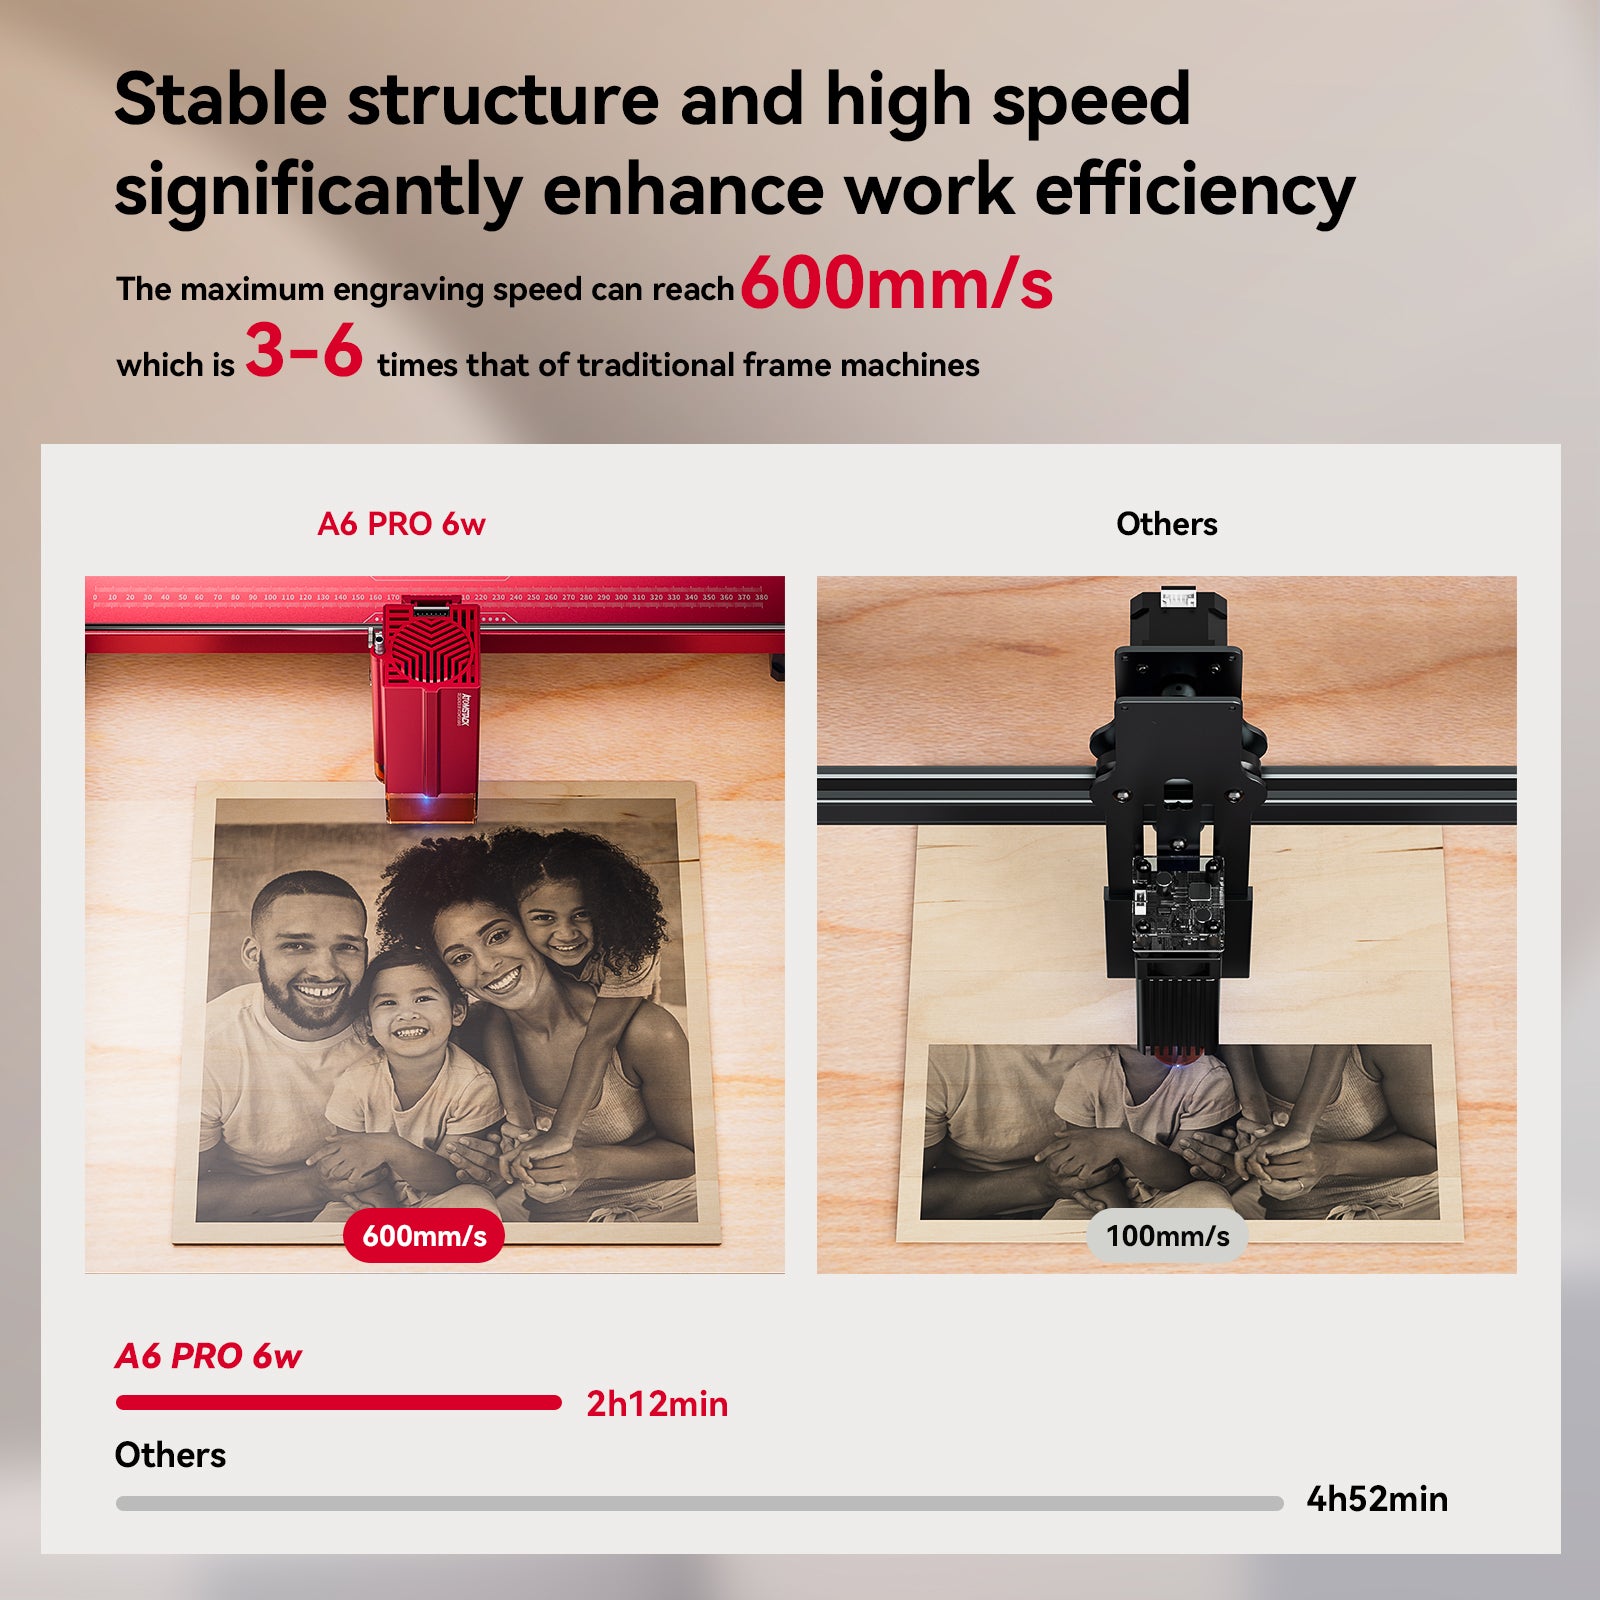 AtomStack A6 PRO Optical Power 6W Laser Engraver Unibody Frame No Assembly Required